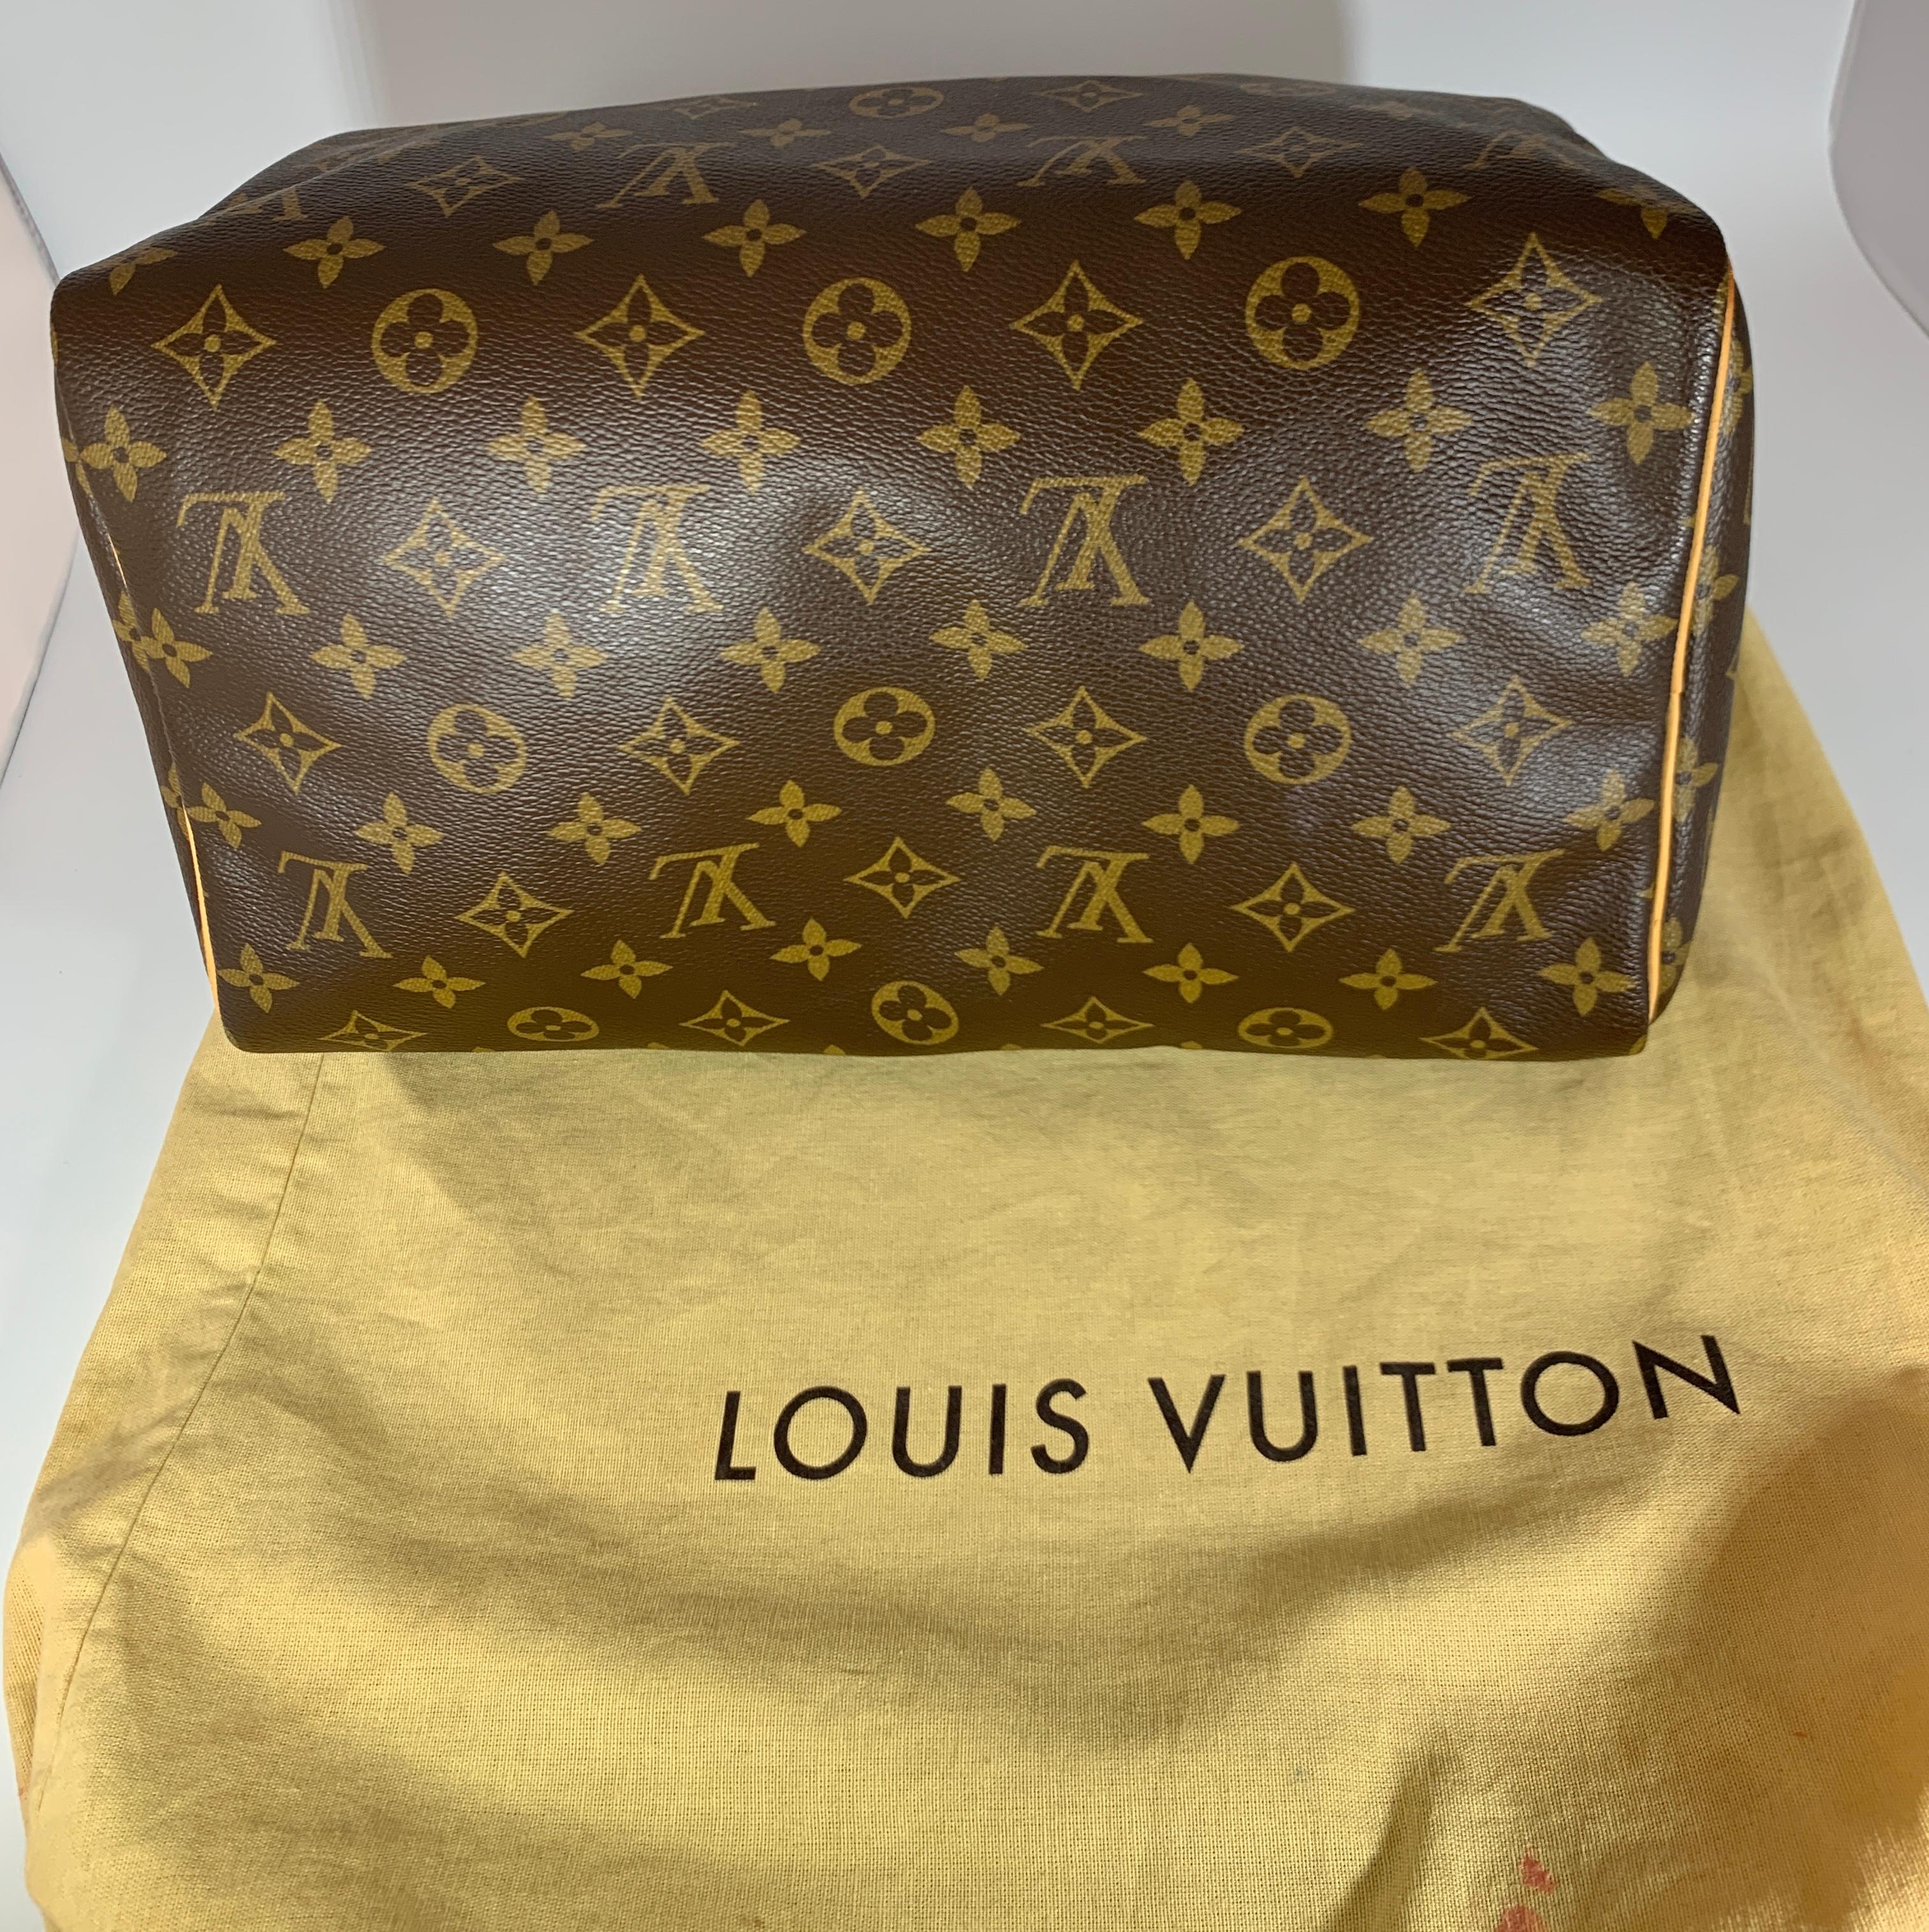 A Louis Vuitton logo-printed Louis Vuitton Speedy 30  with leather trim with bring a touch of heritage luxury wherever you carry it.
Over all Excellent  condition, Like  new
No stain , no fading , lining is in great shape
It will come  in  a Louis